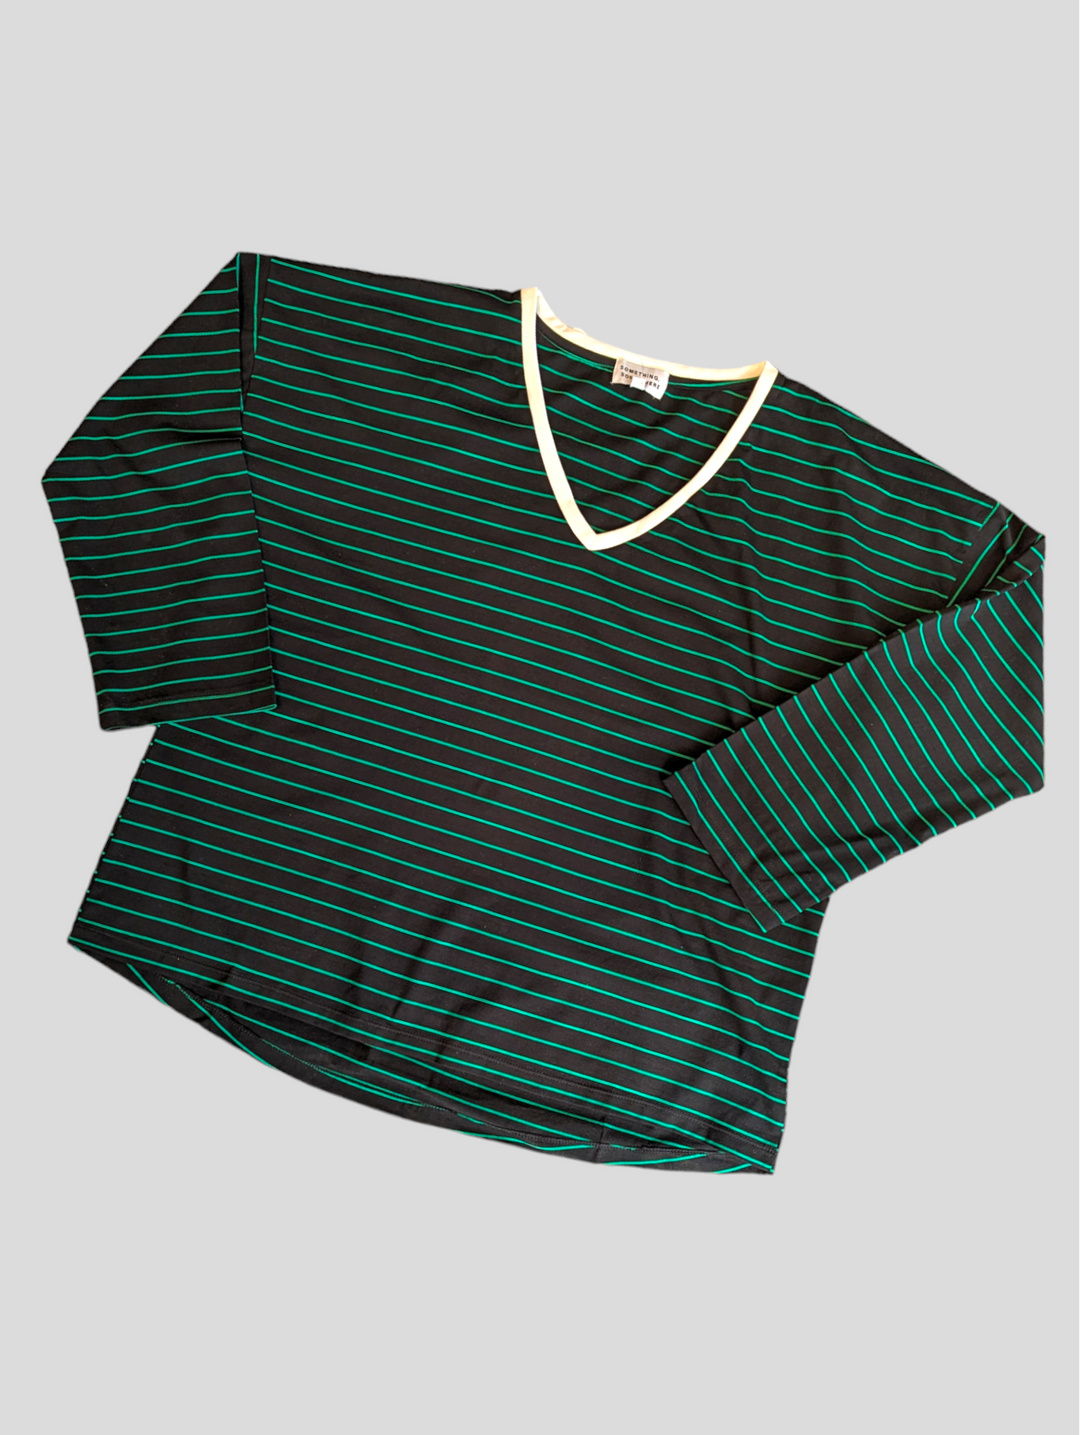 A black and green stripe long sleeve tee in a flat lay pattern